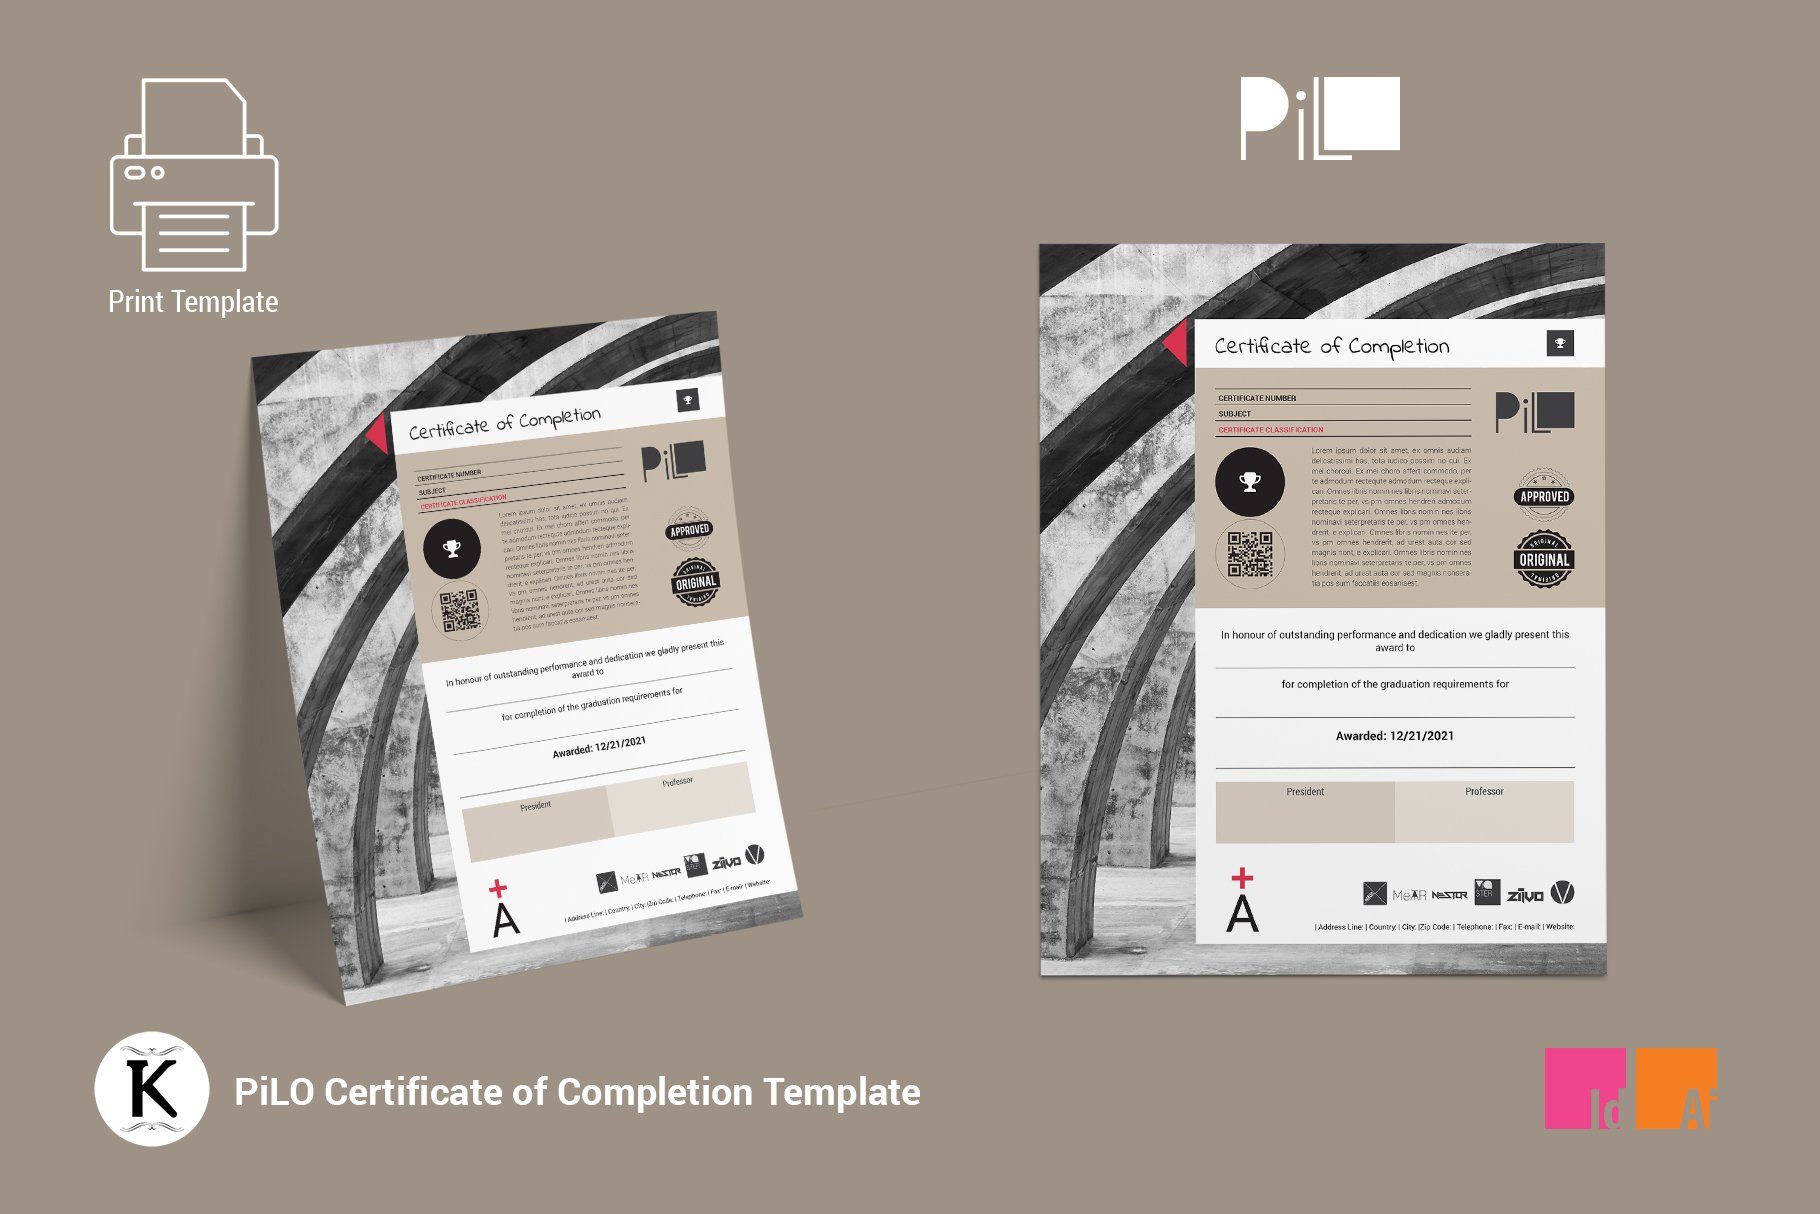 PiLO Certificate of Completion cover image.